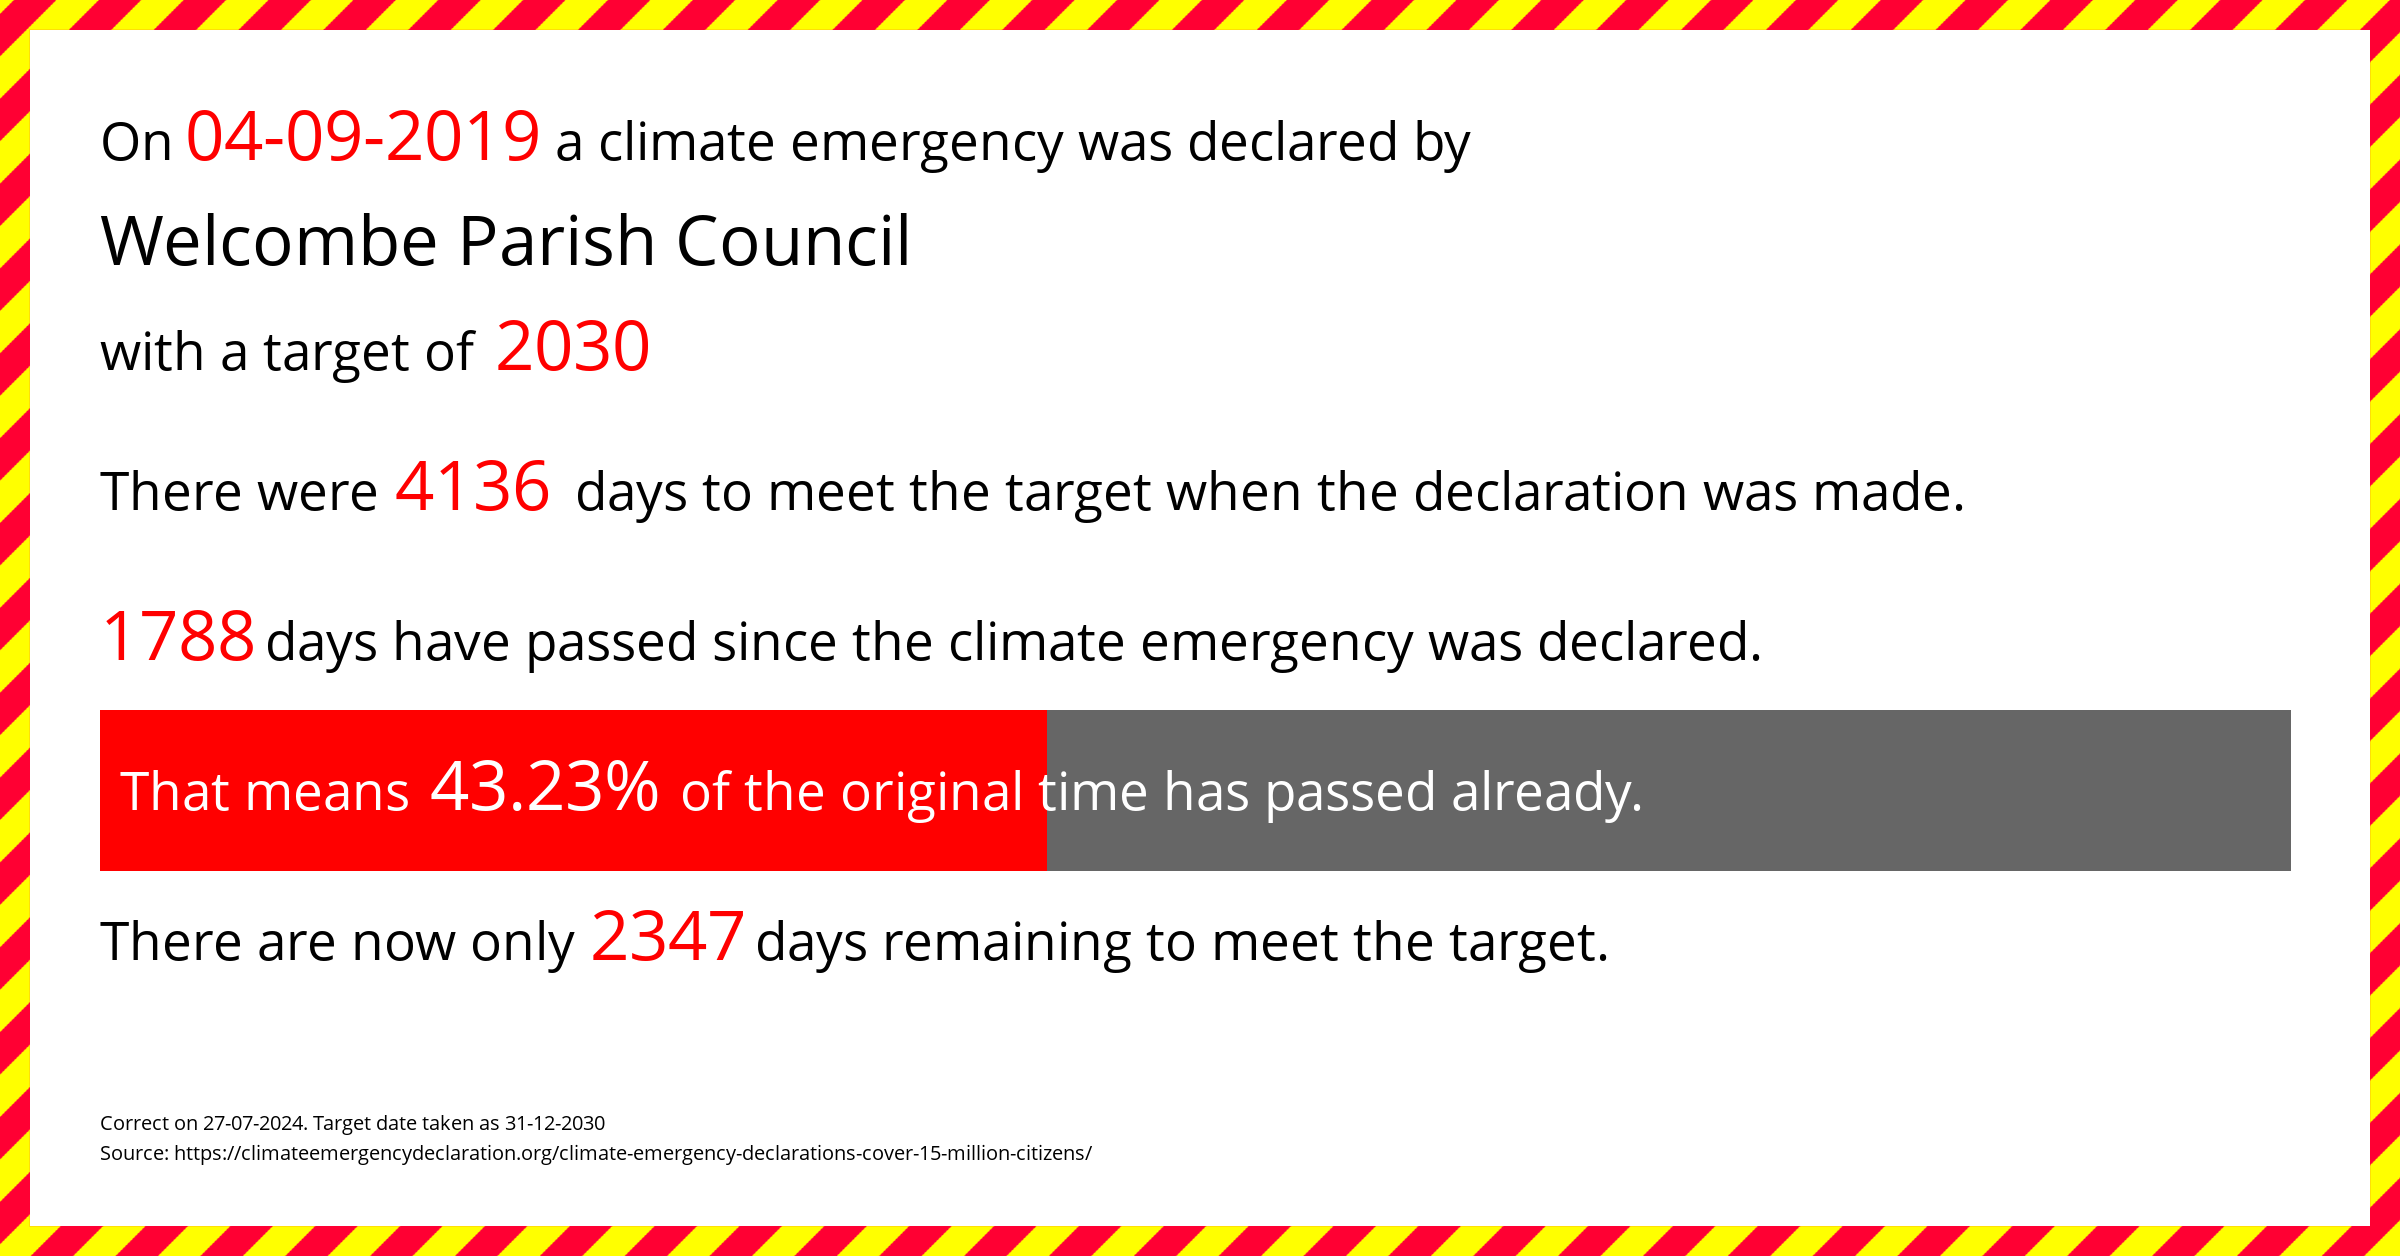 Welcombe Parish Council declared a Climate emergency on Wednesday 4th September 2019, with a target of 2030.